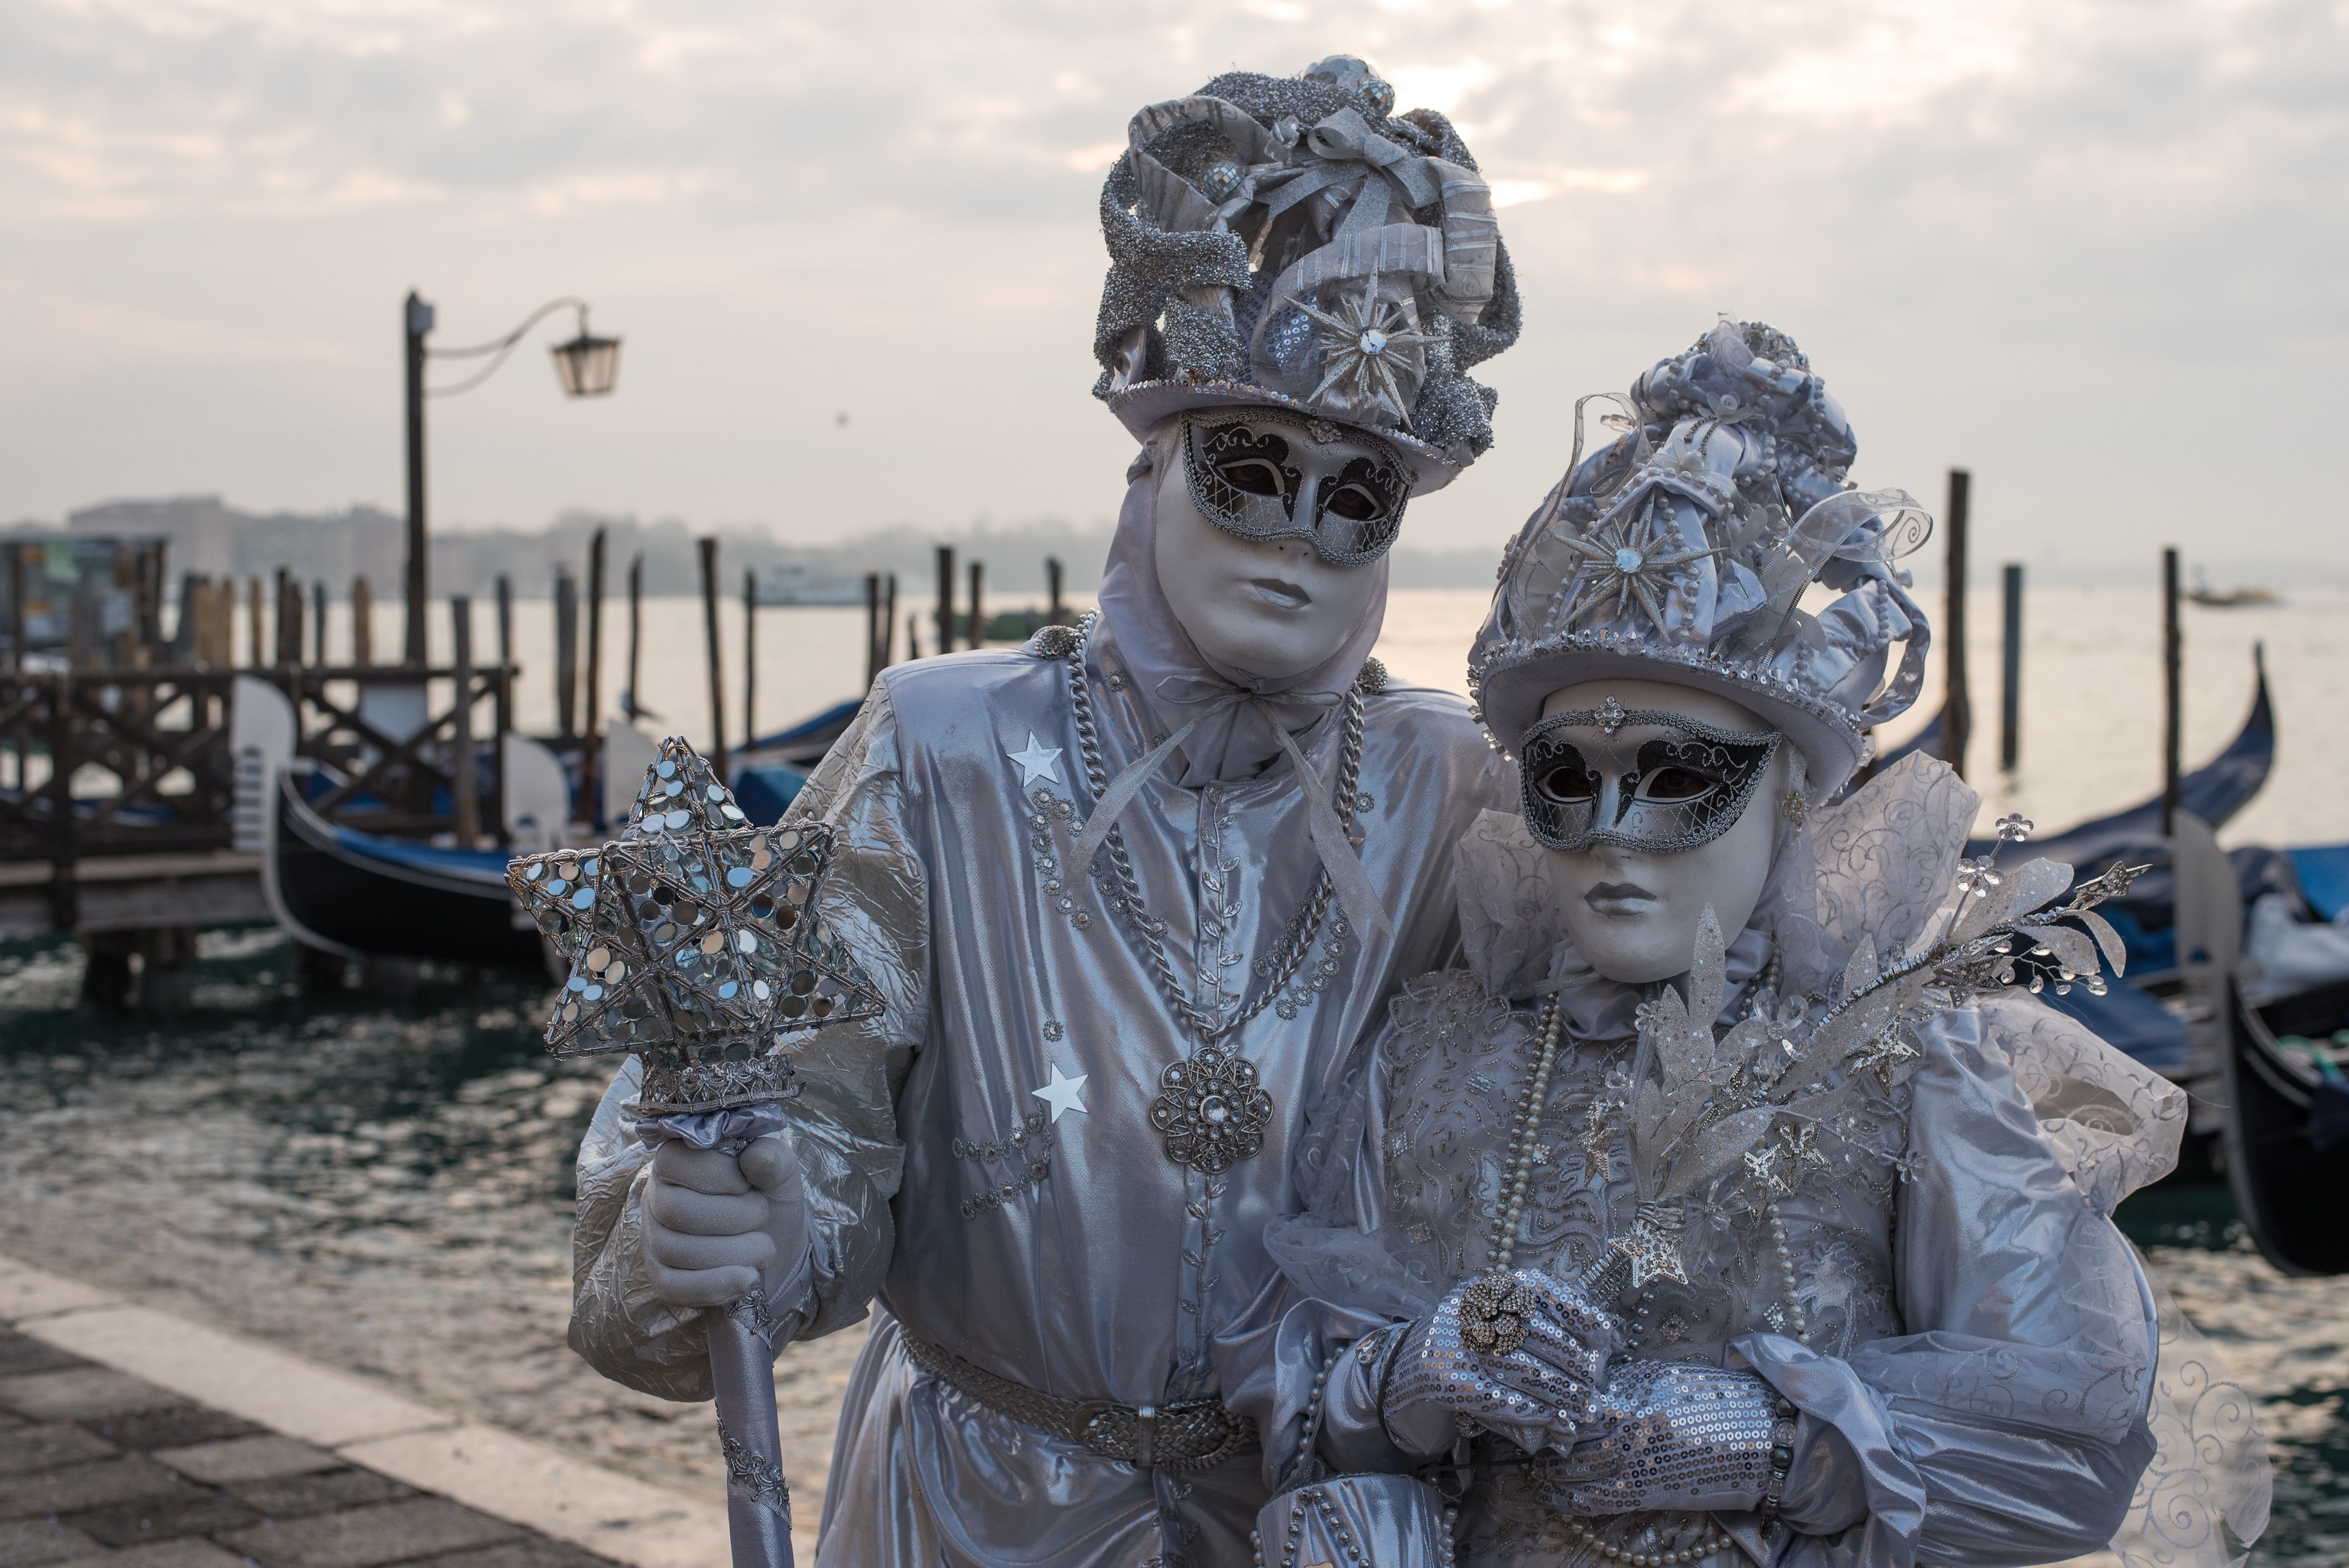 android photography, carnival of venice, carnival, costume, italy, venice